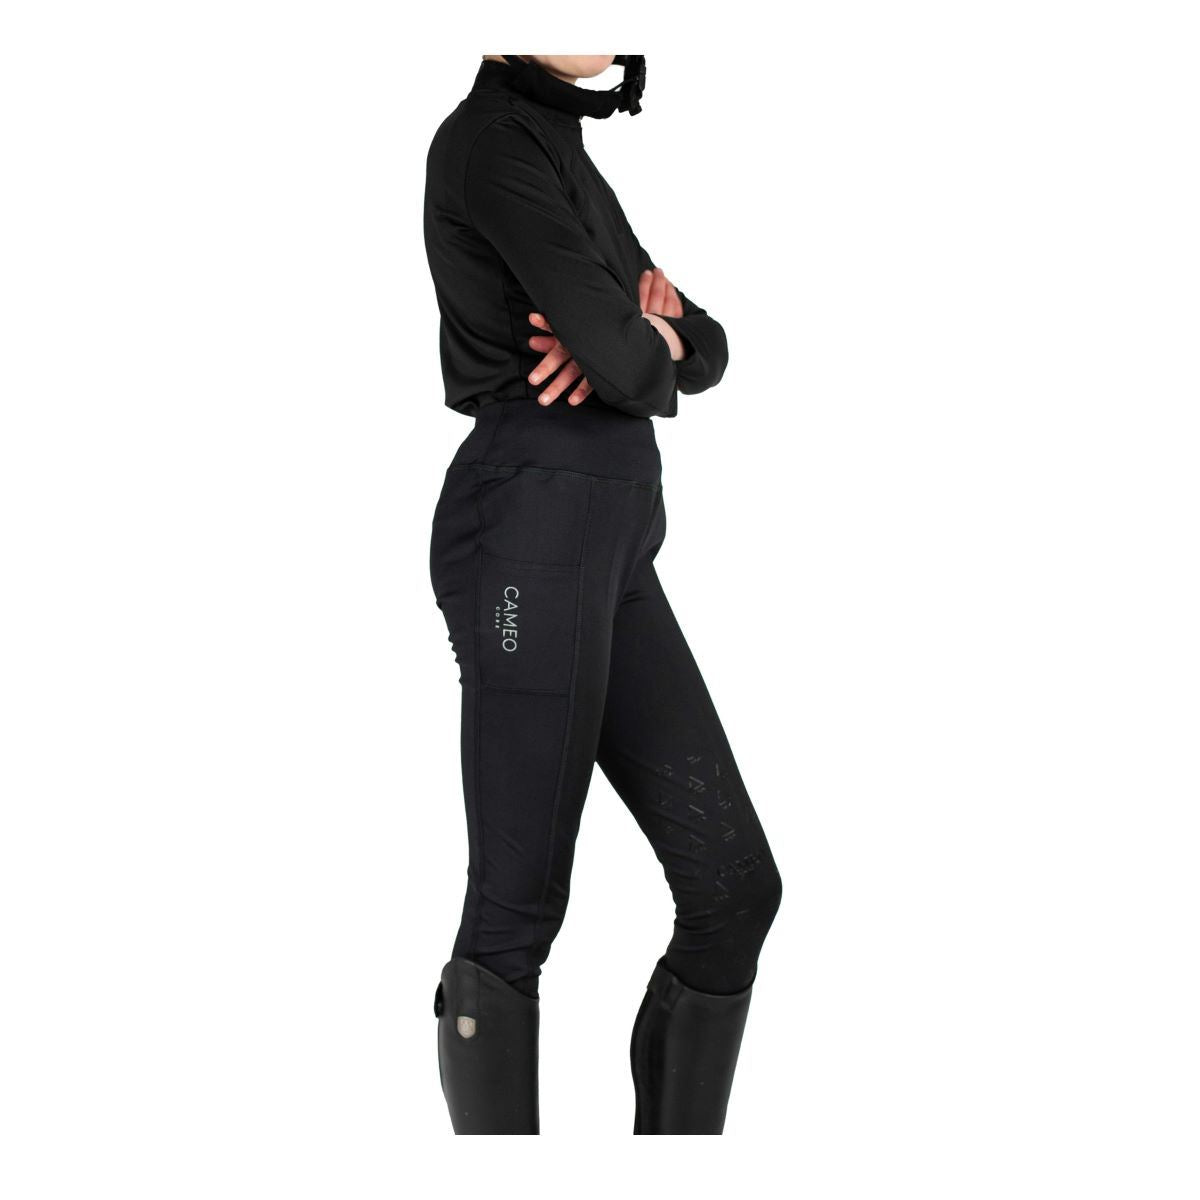 Cameo Equine Junior Core Horse Riding Tights Comfortable Flexible Phone Pocket - Just Horse Riders